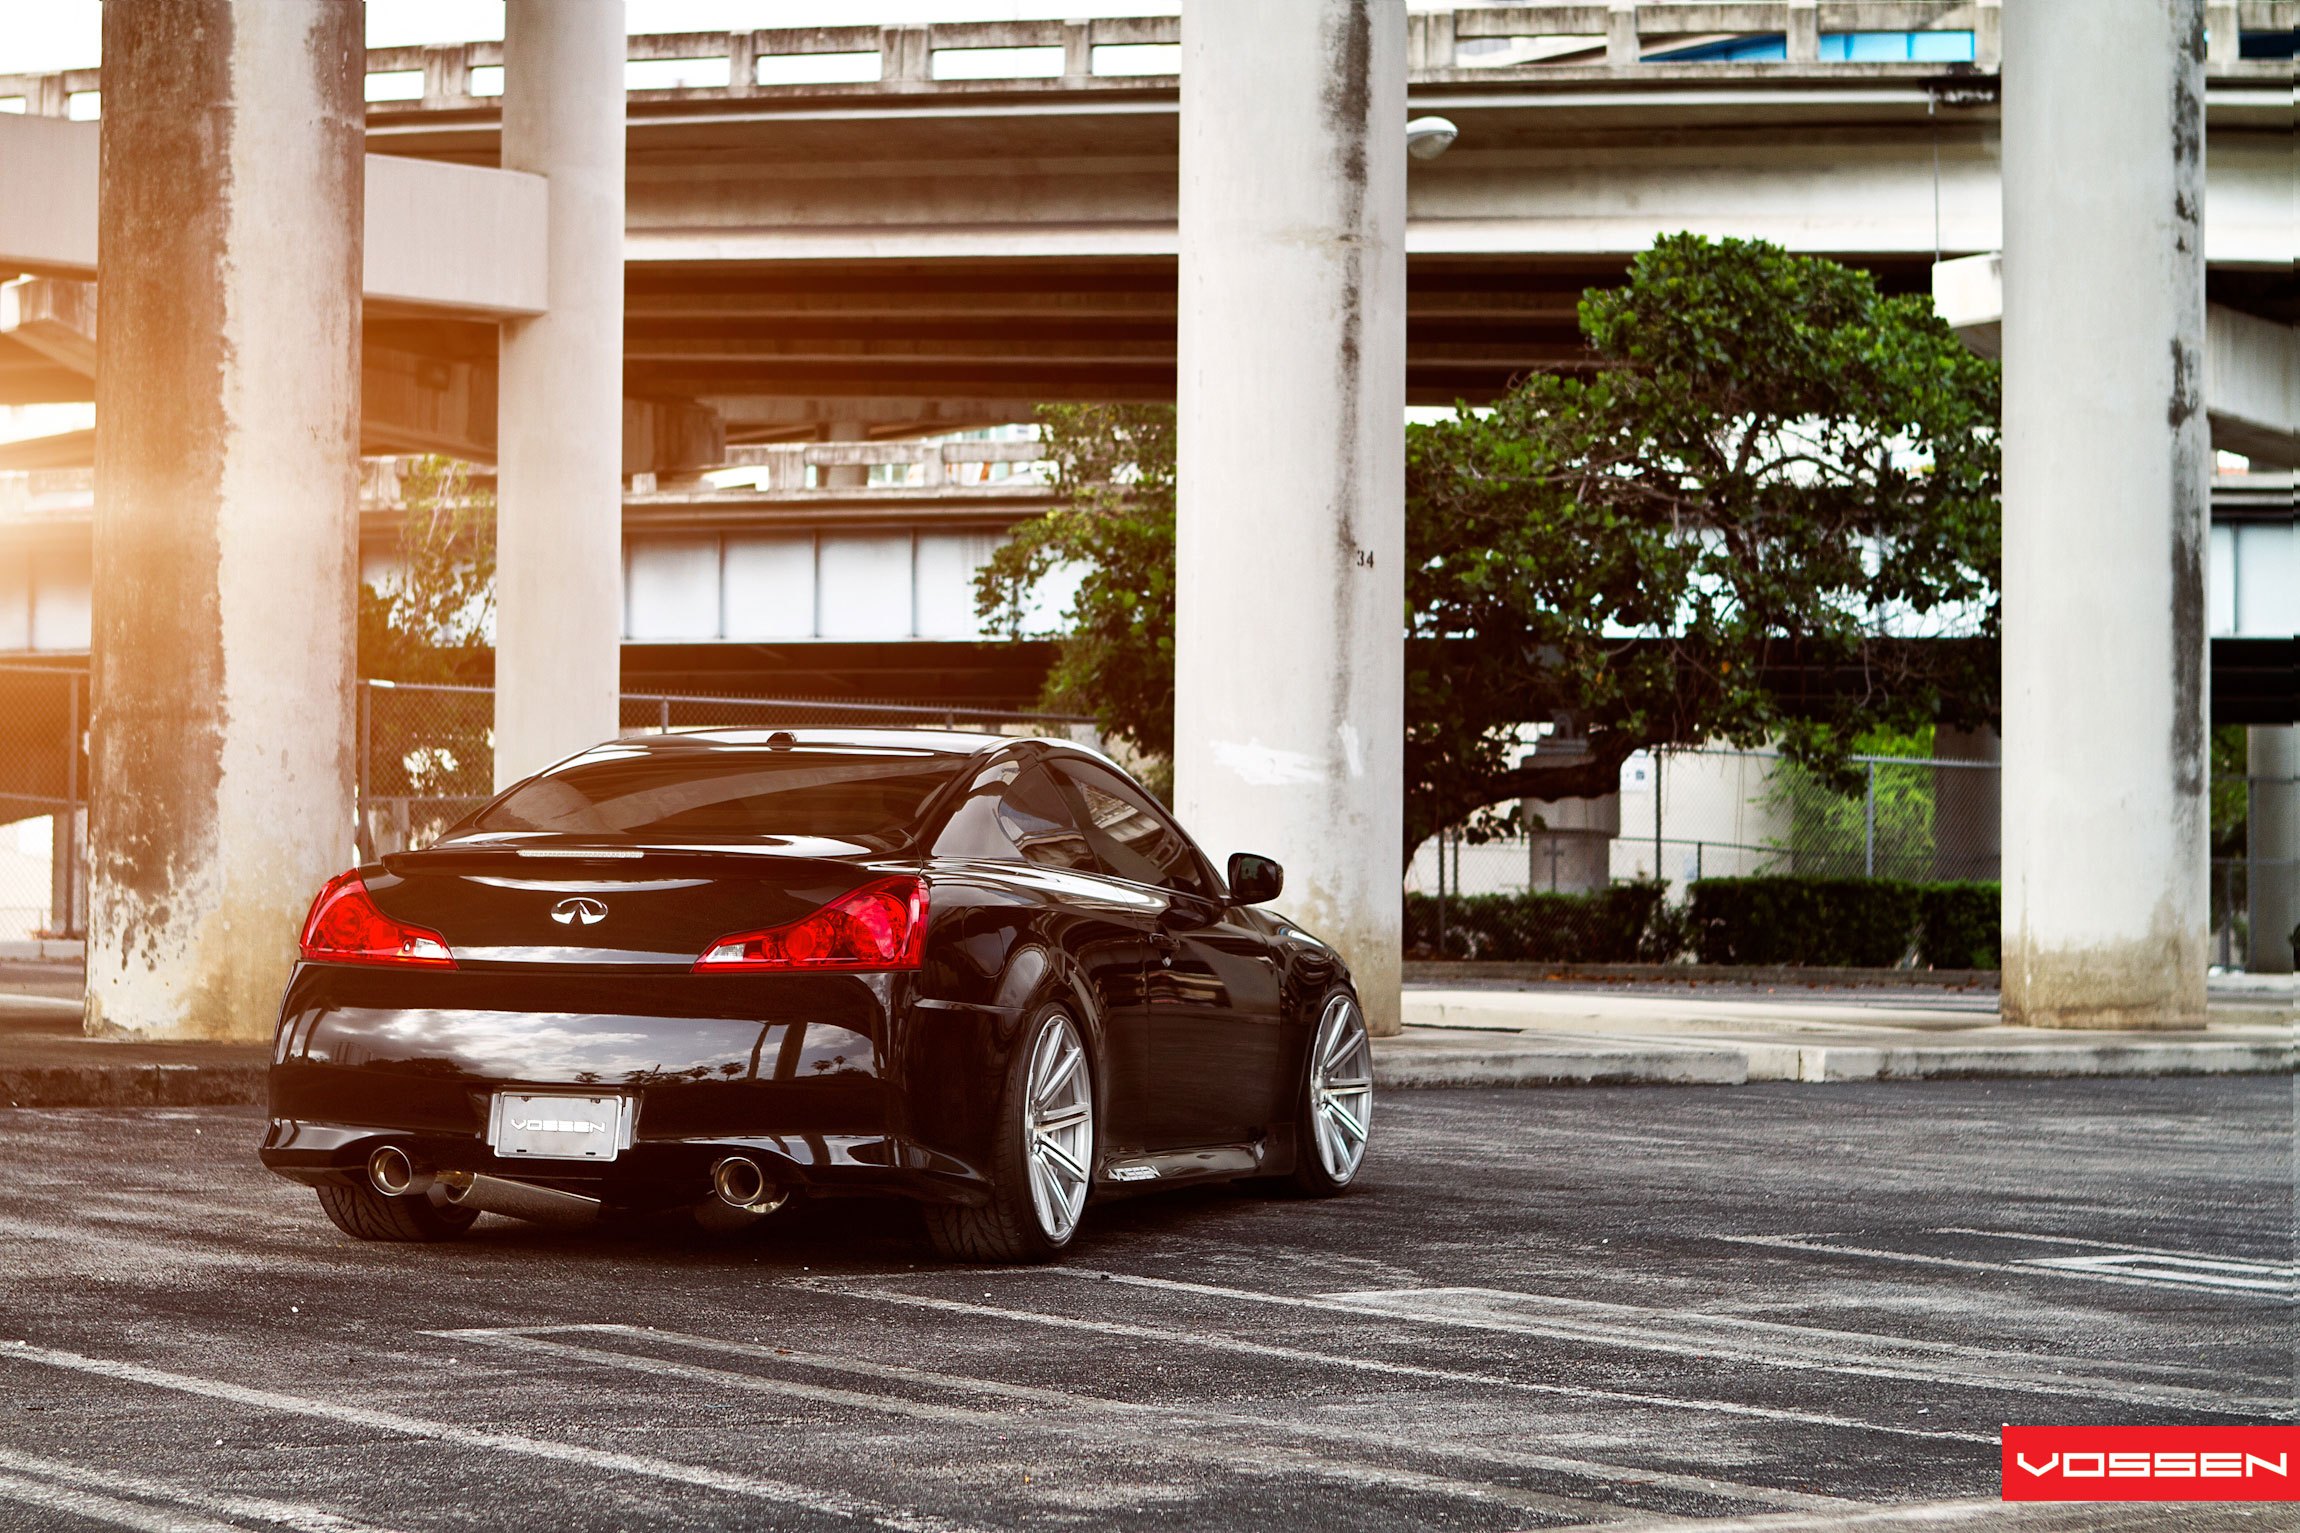 Black Stanced Infiniti G37 with Custom Exhaust System - Photo by Vossen